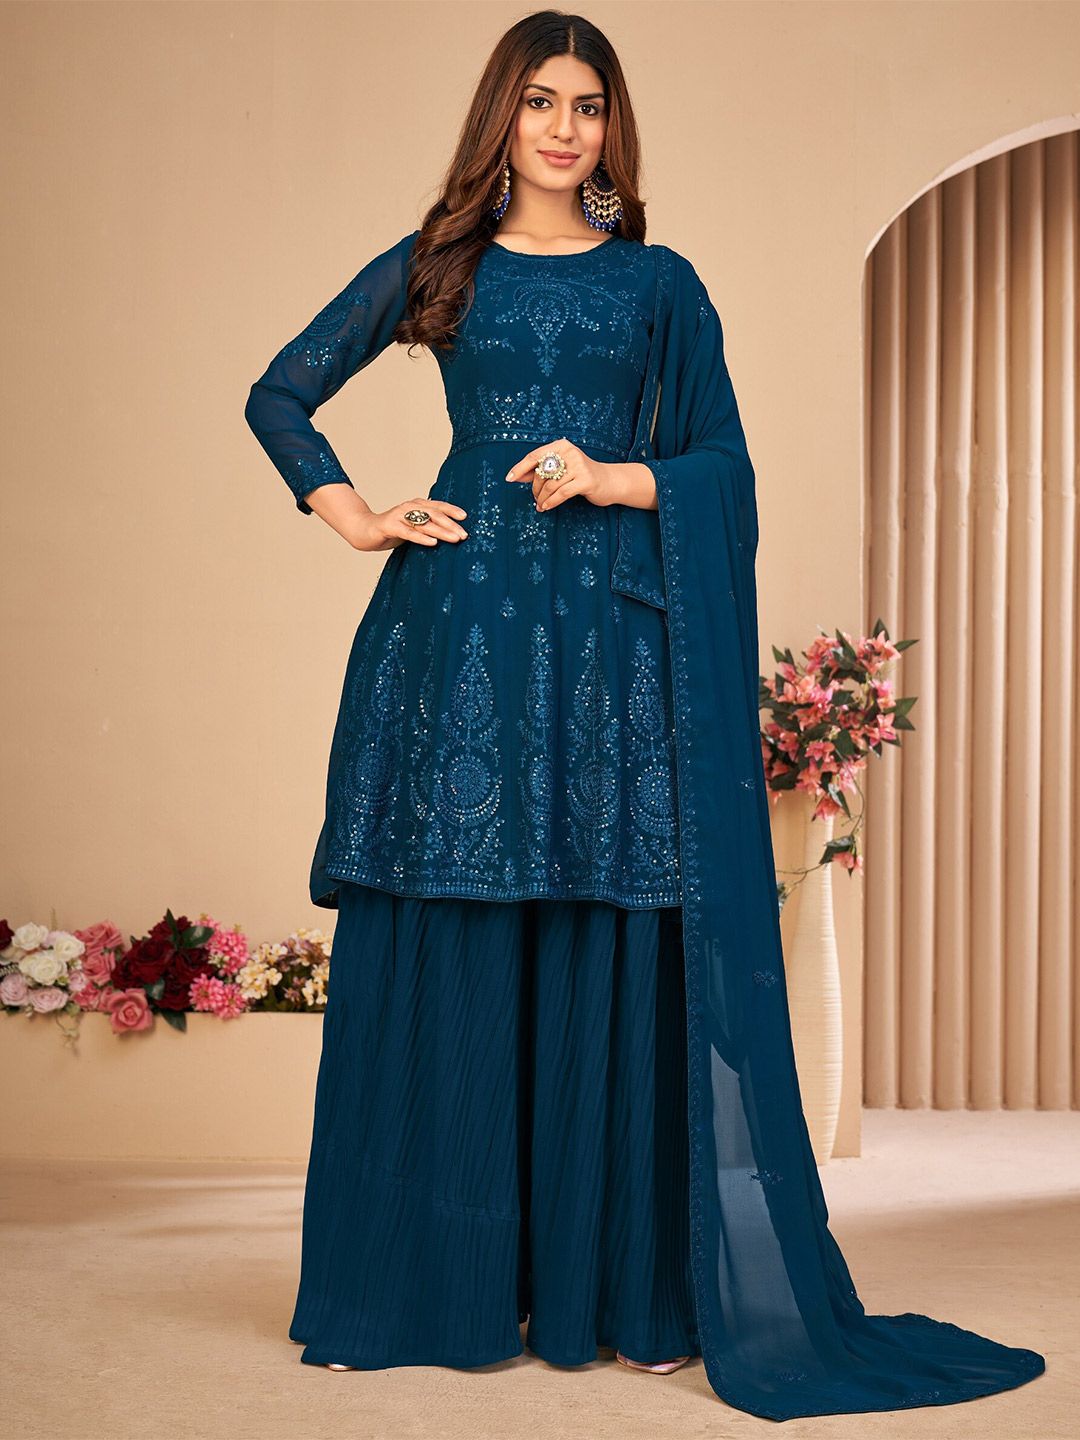 Divine International Trading Co Turquoise Blue Embroidered Unstitched Dress Material Price in India